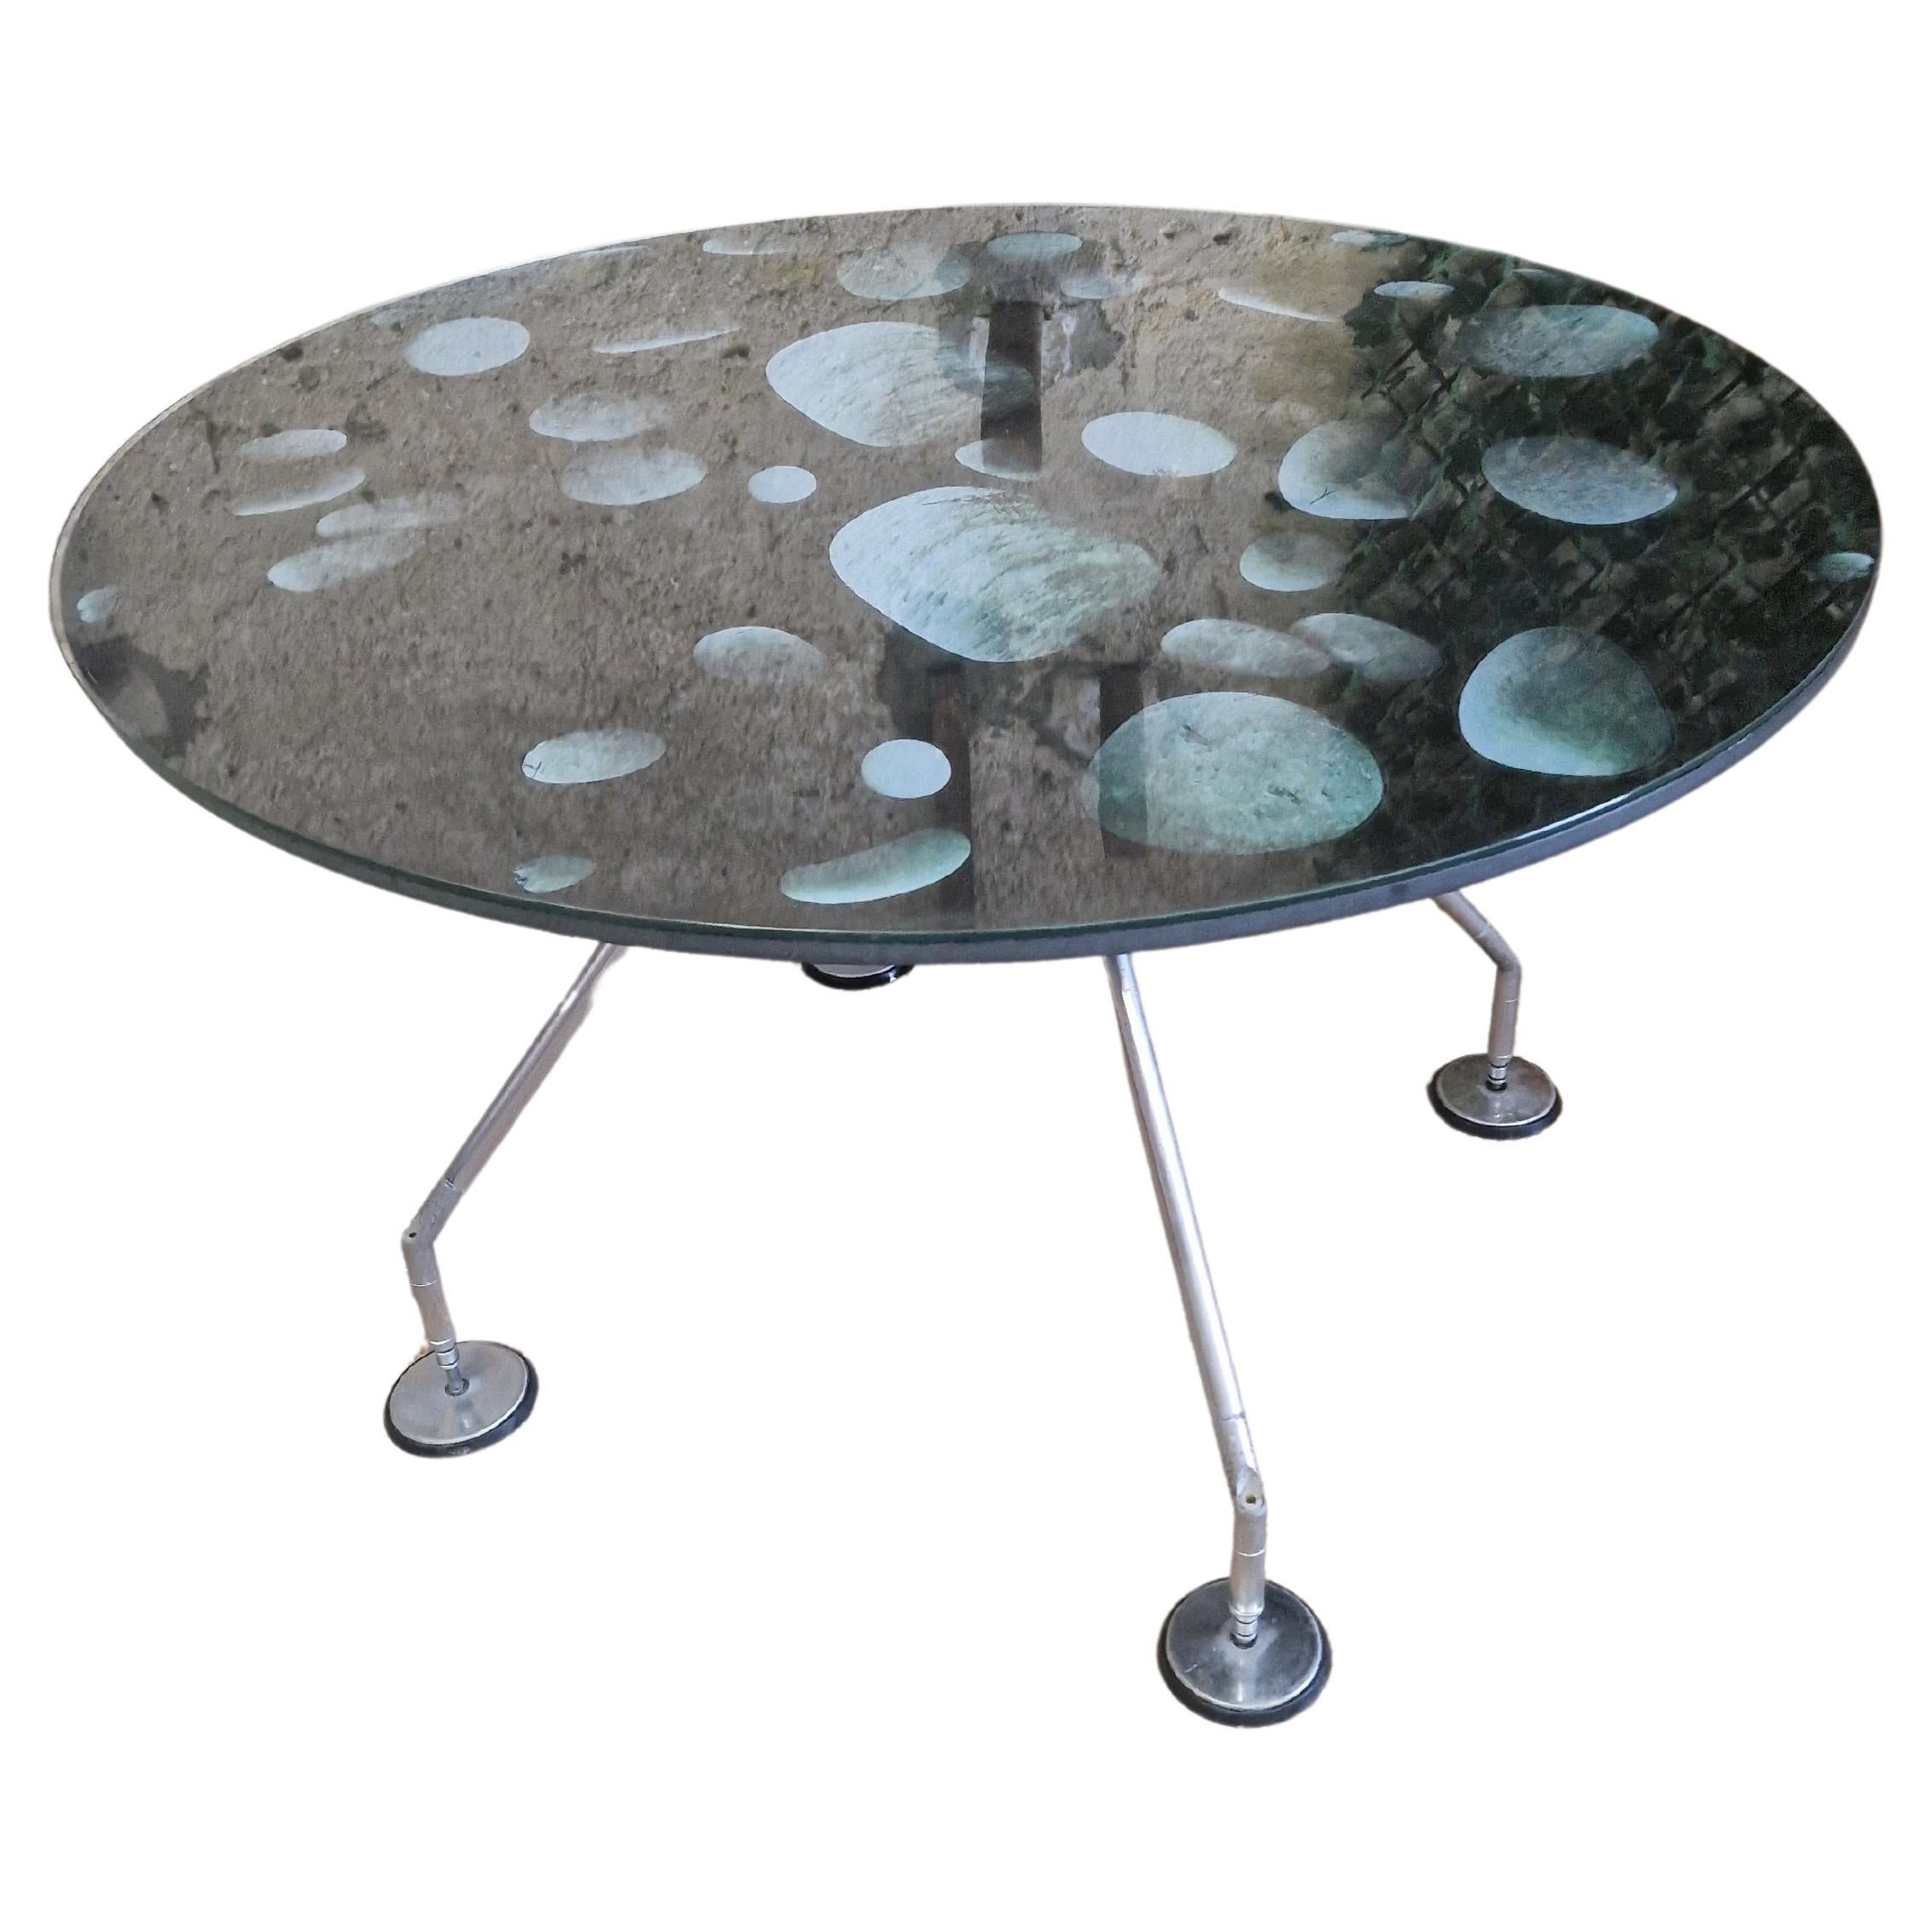 Vintage Table Sir Norman Foster 1935 Techno Edition with Pebbles For Sale